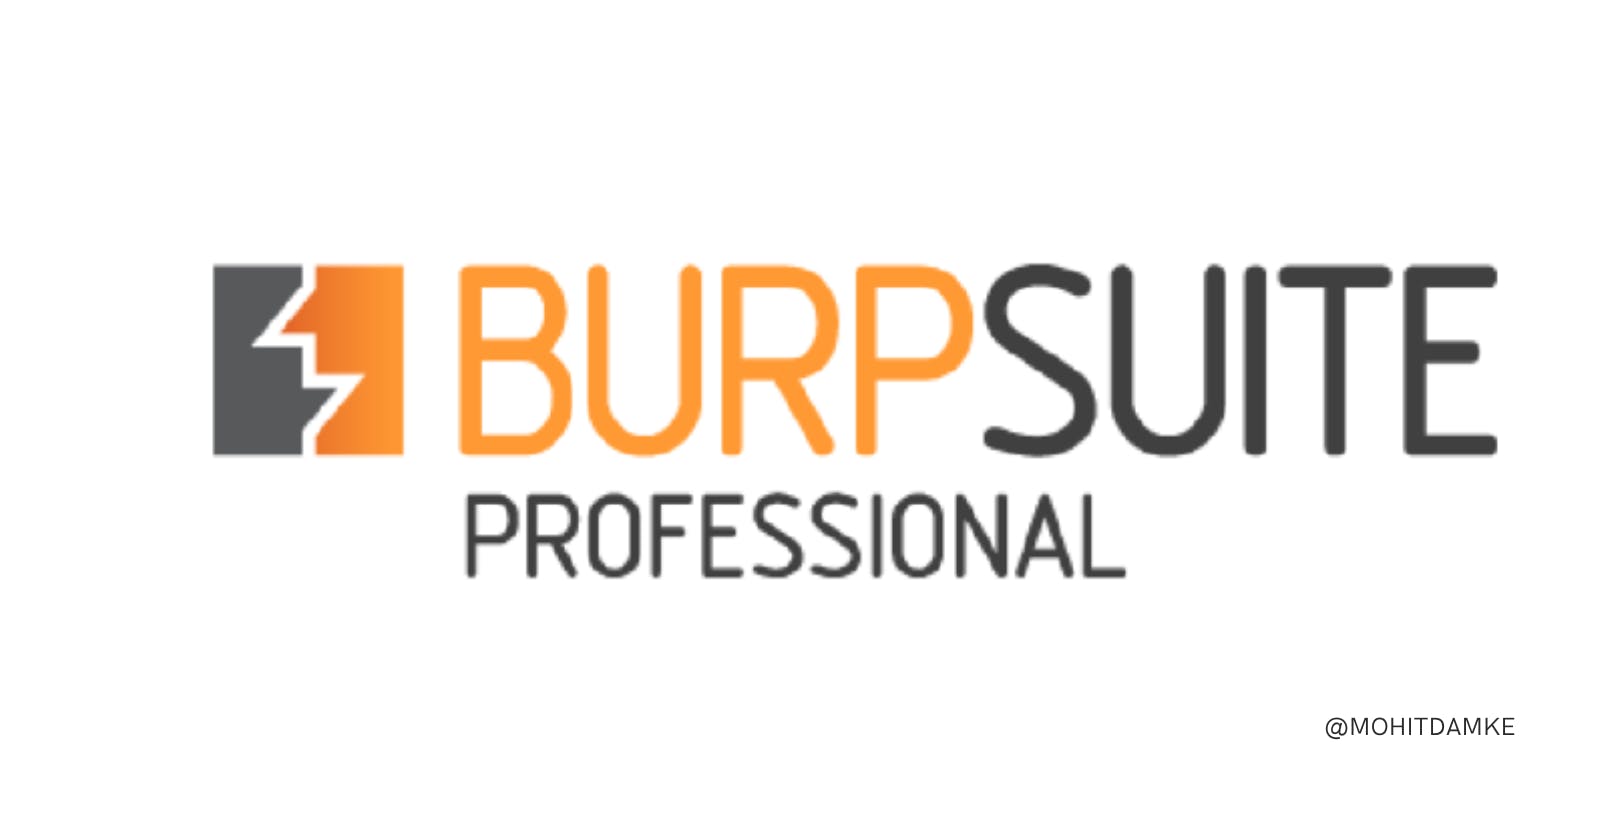 Burp Suite | Introduction | Cyber Security | By Mohit Damke